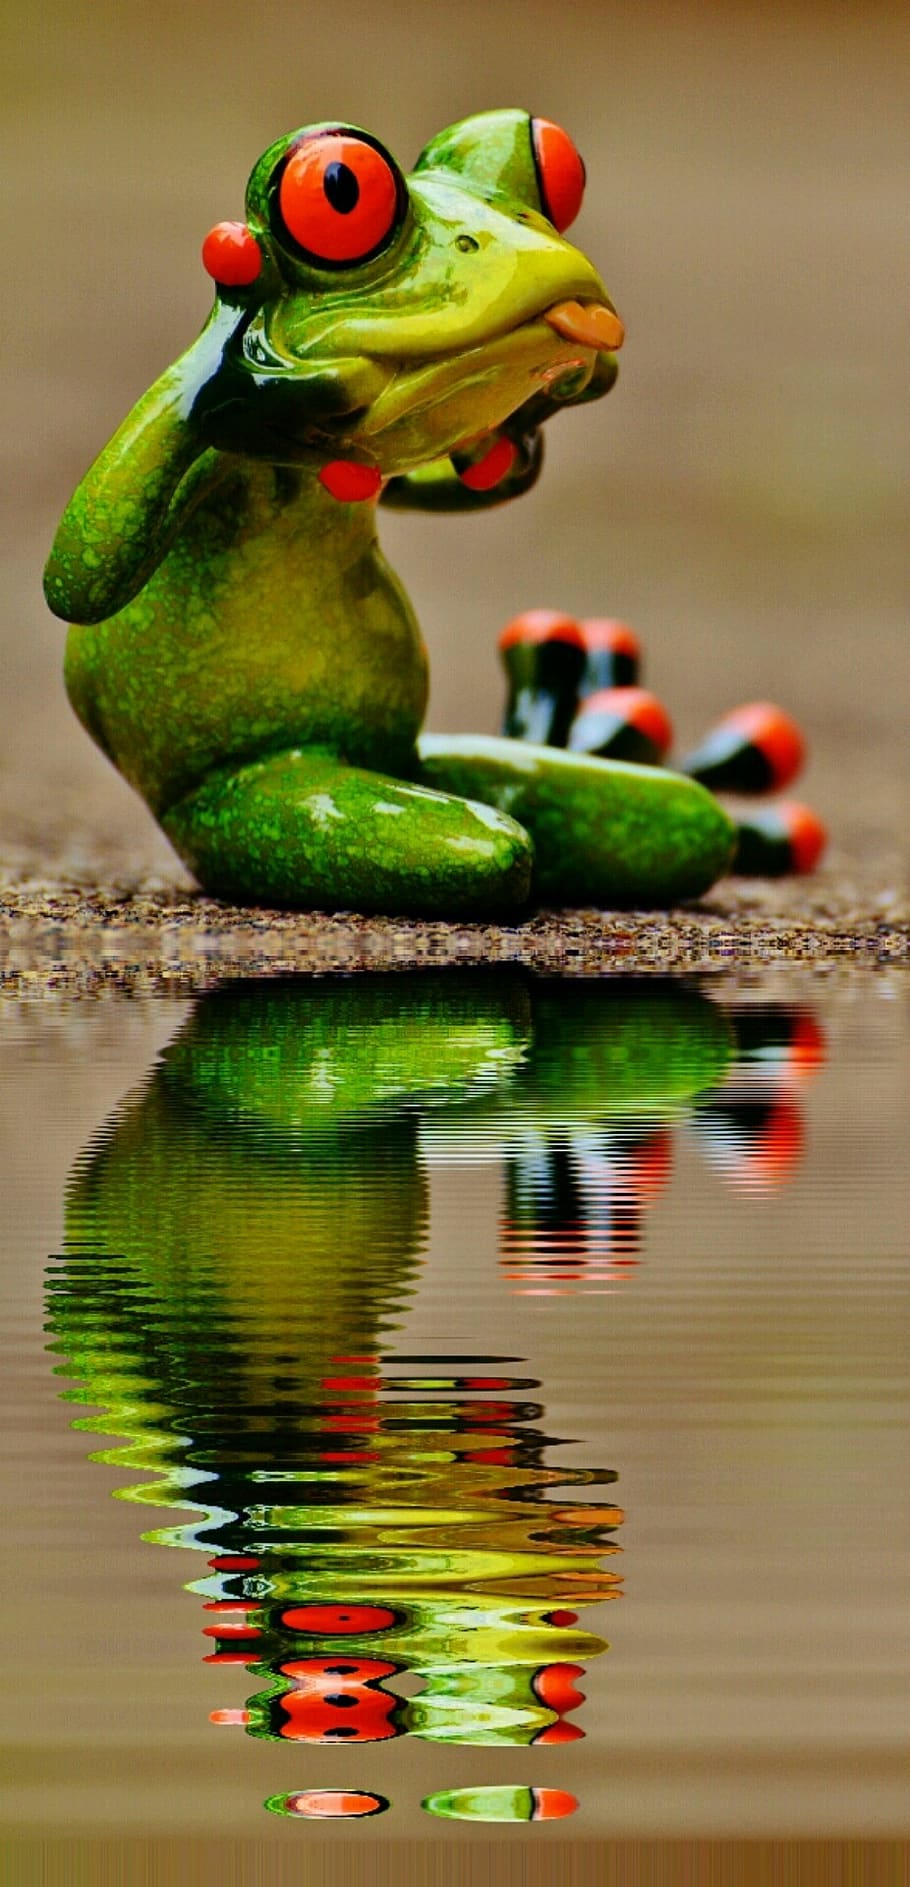 frog, stick out tongue, cheeky, figure, decoration, cute, sweet, fun, ceramic, funny